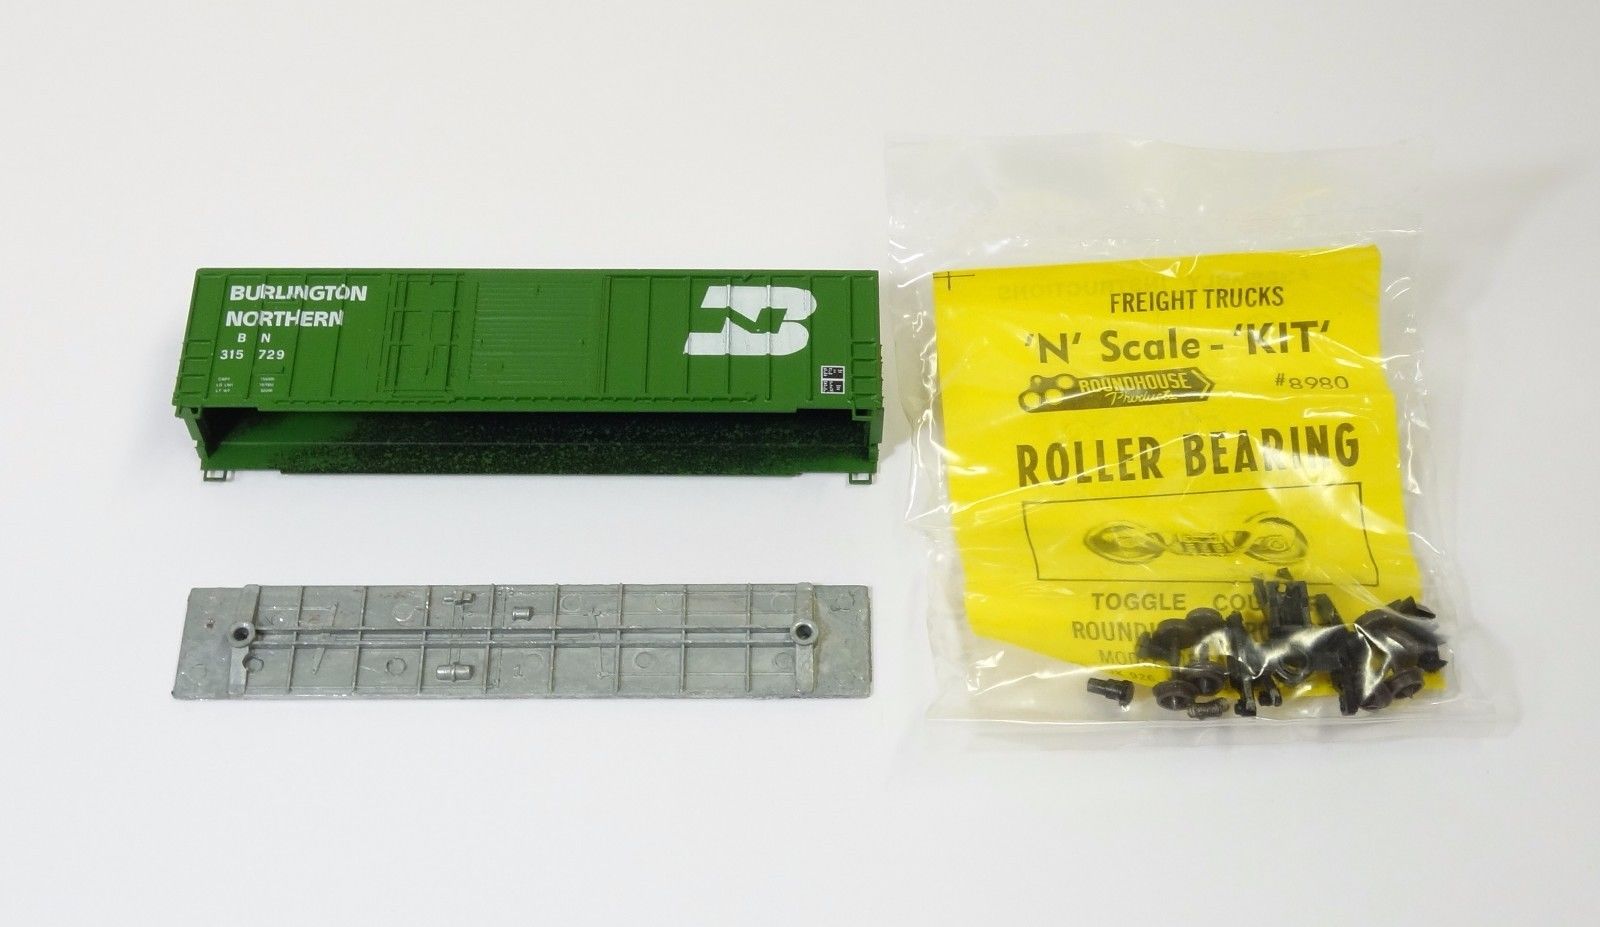 N Scale - Roundhouse - 8235 - Boxcar, 50 Foot, FMC, 5077 - Burlington Northern - 315729